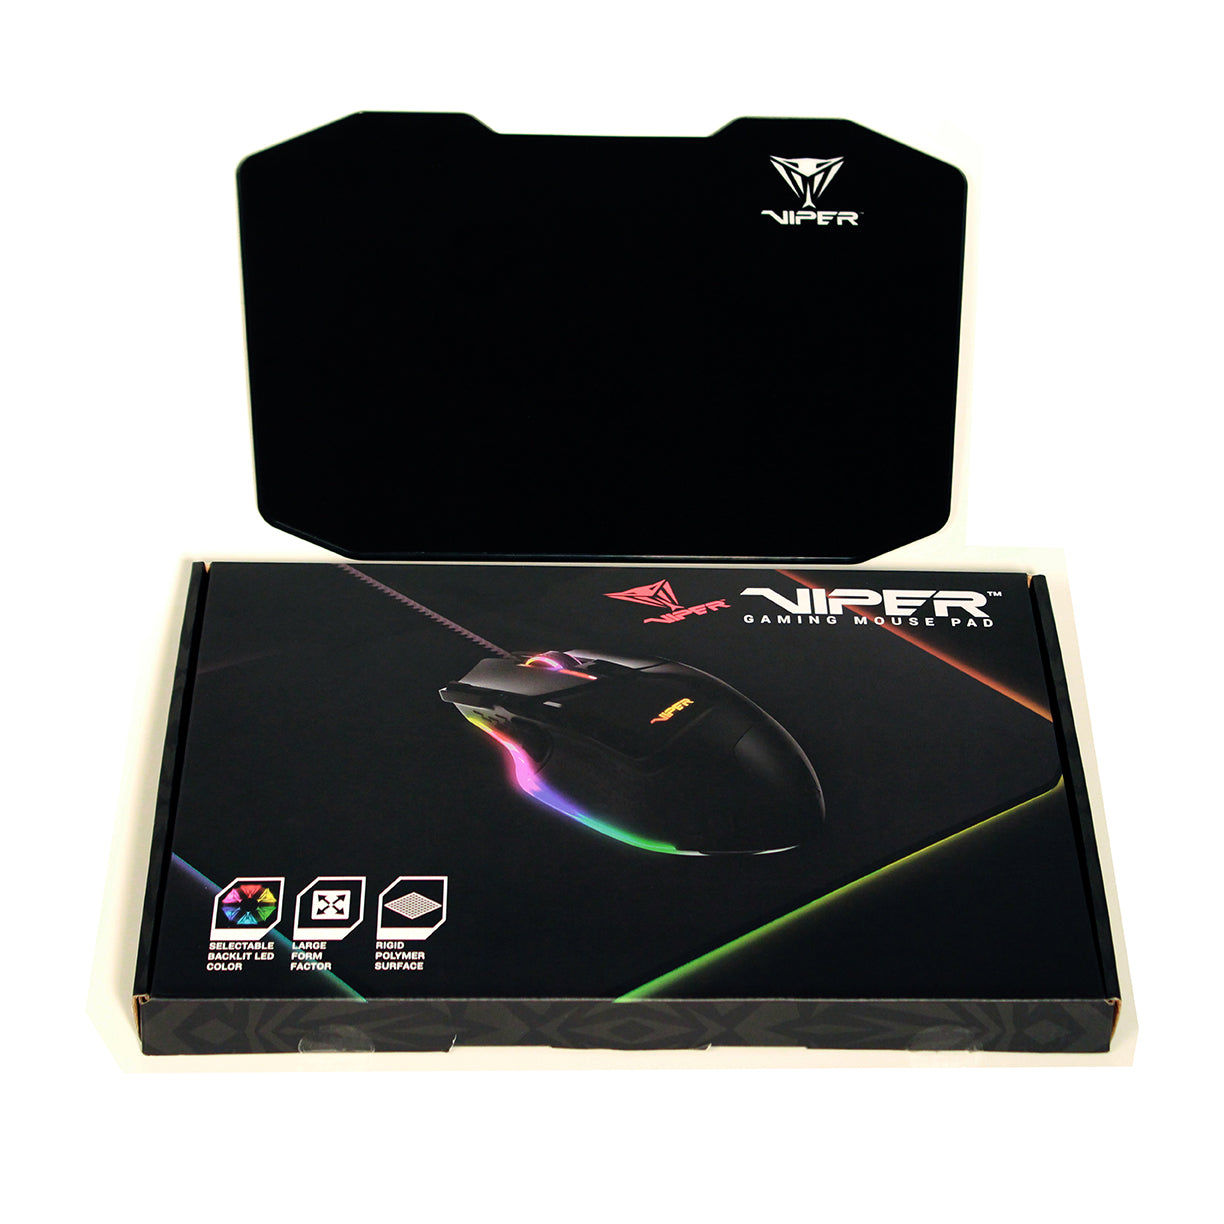 Viper Gaming Mouse Pad Supersize